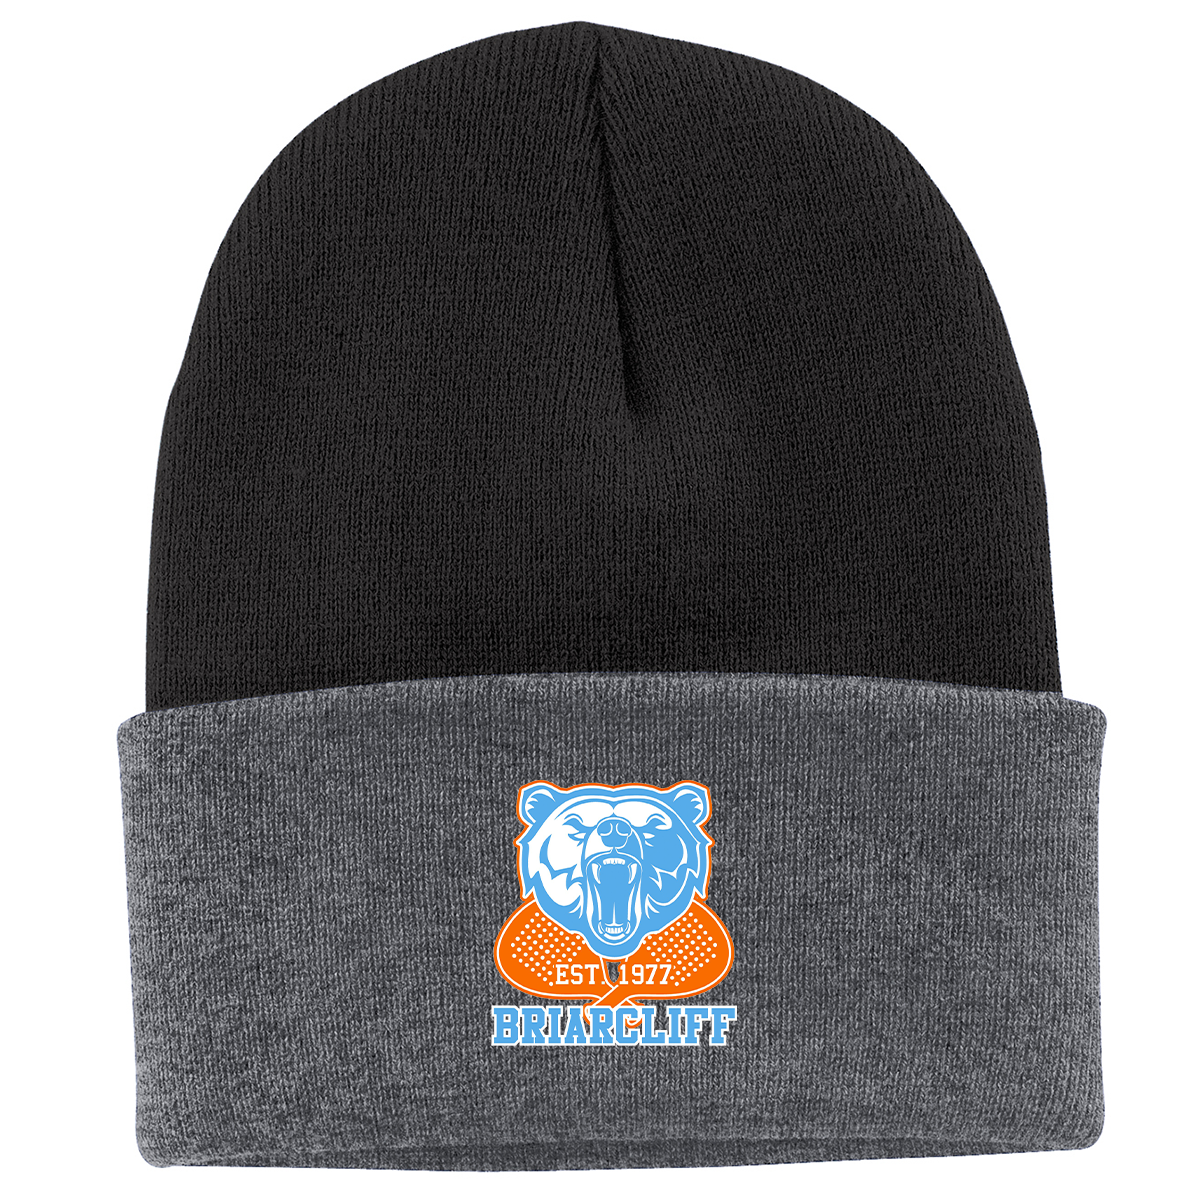 Briarcliff Paddle Knit Beanie